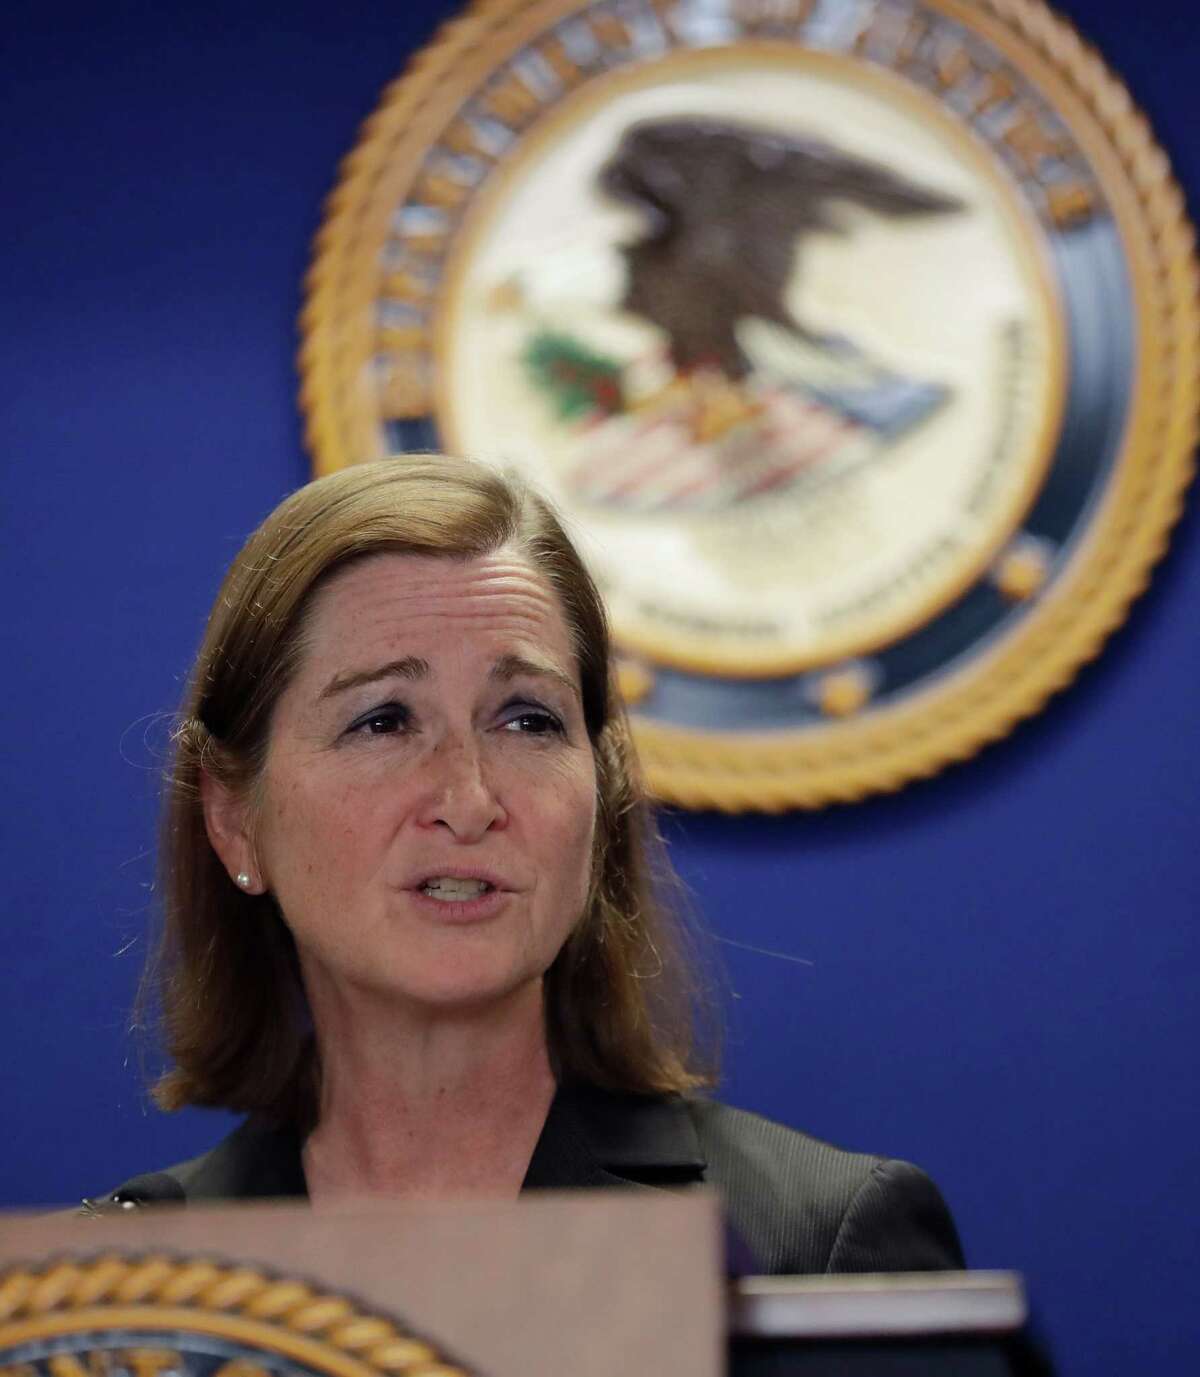 U.S. Attorney Barbara McQuade of the Eastern District of Michigan addresses the media, Friday, Jan. 13, 2017, in Detroit. McQuade announced that Takata Corp. has agreed to plead guilty to a single criminal charge and will pay $1 billion in fines and restitution for a years-long scheme to conceal a deadly defect in its automotive air bag inflators. (AP Photo/Carlos Osorio)